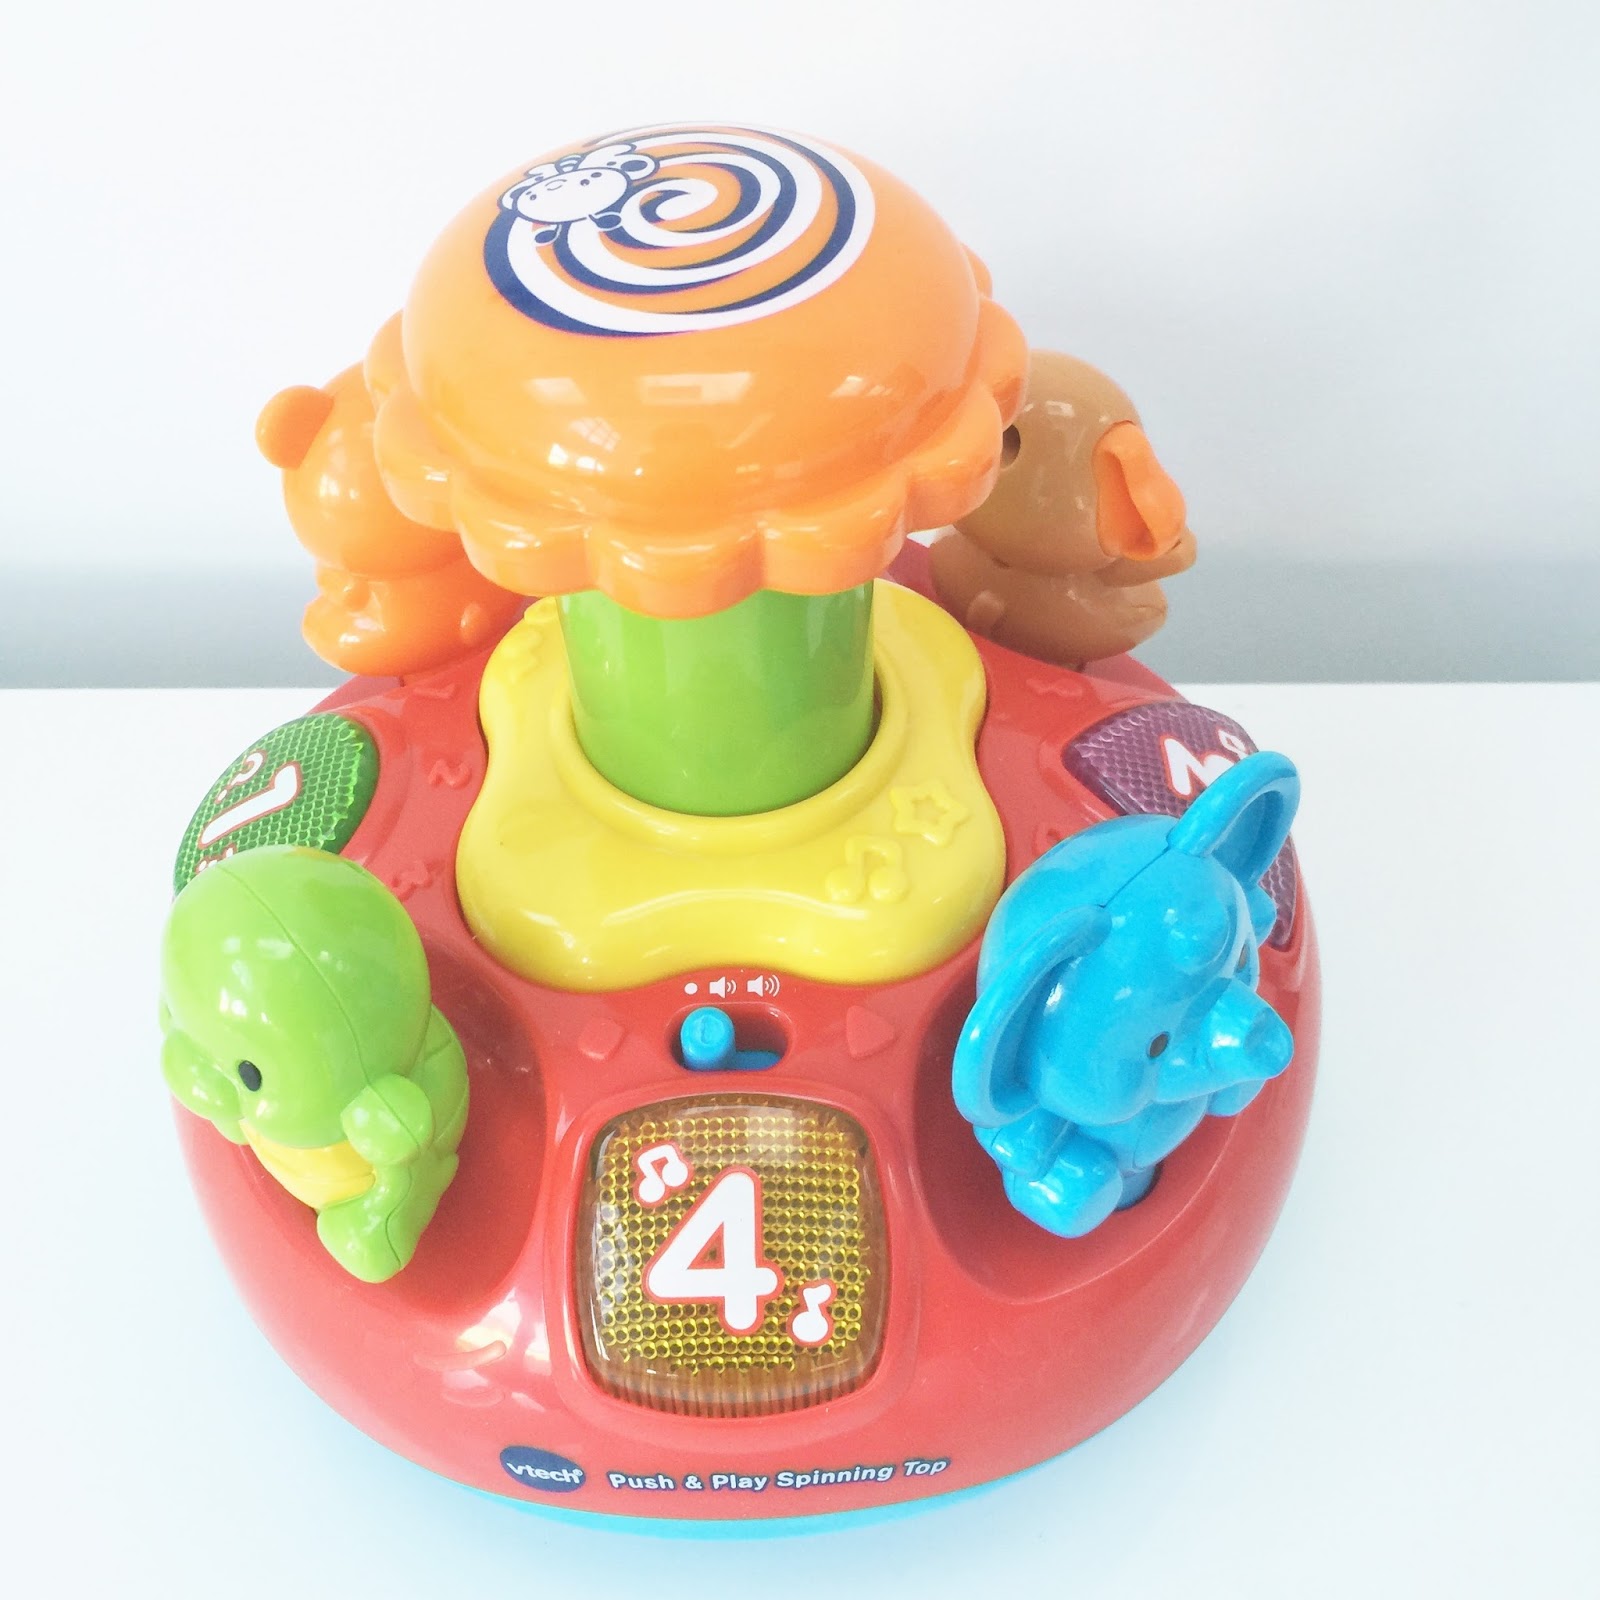 Multi-Coloured VTech Baby Push and Play Spinning Top Toy 